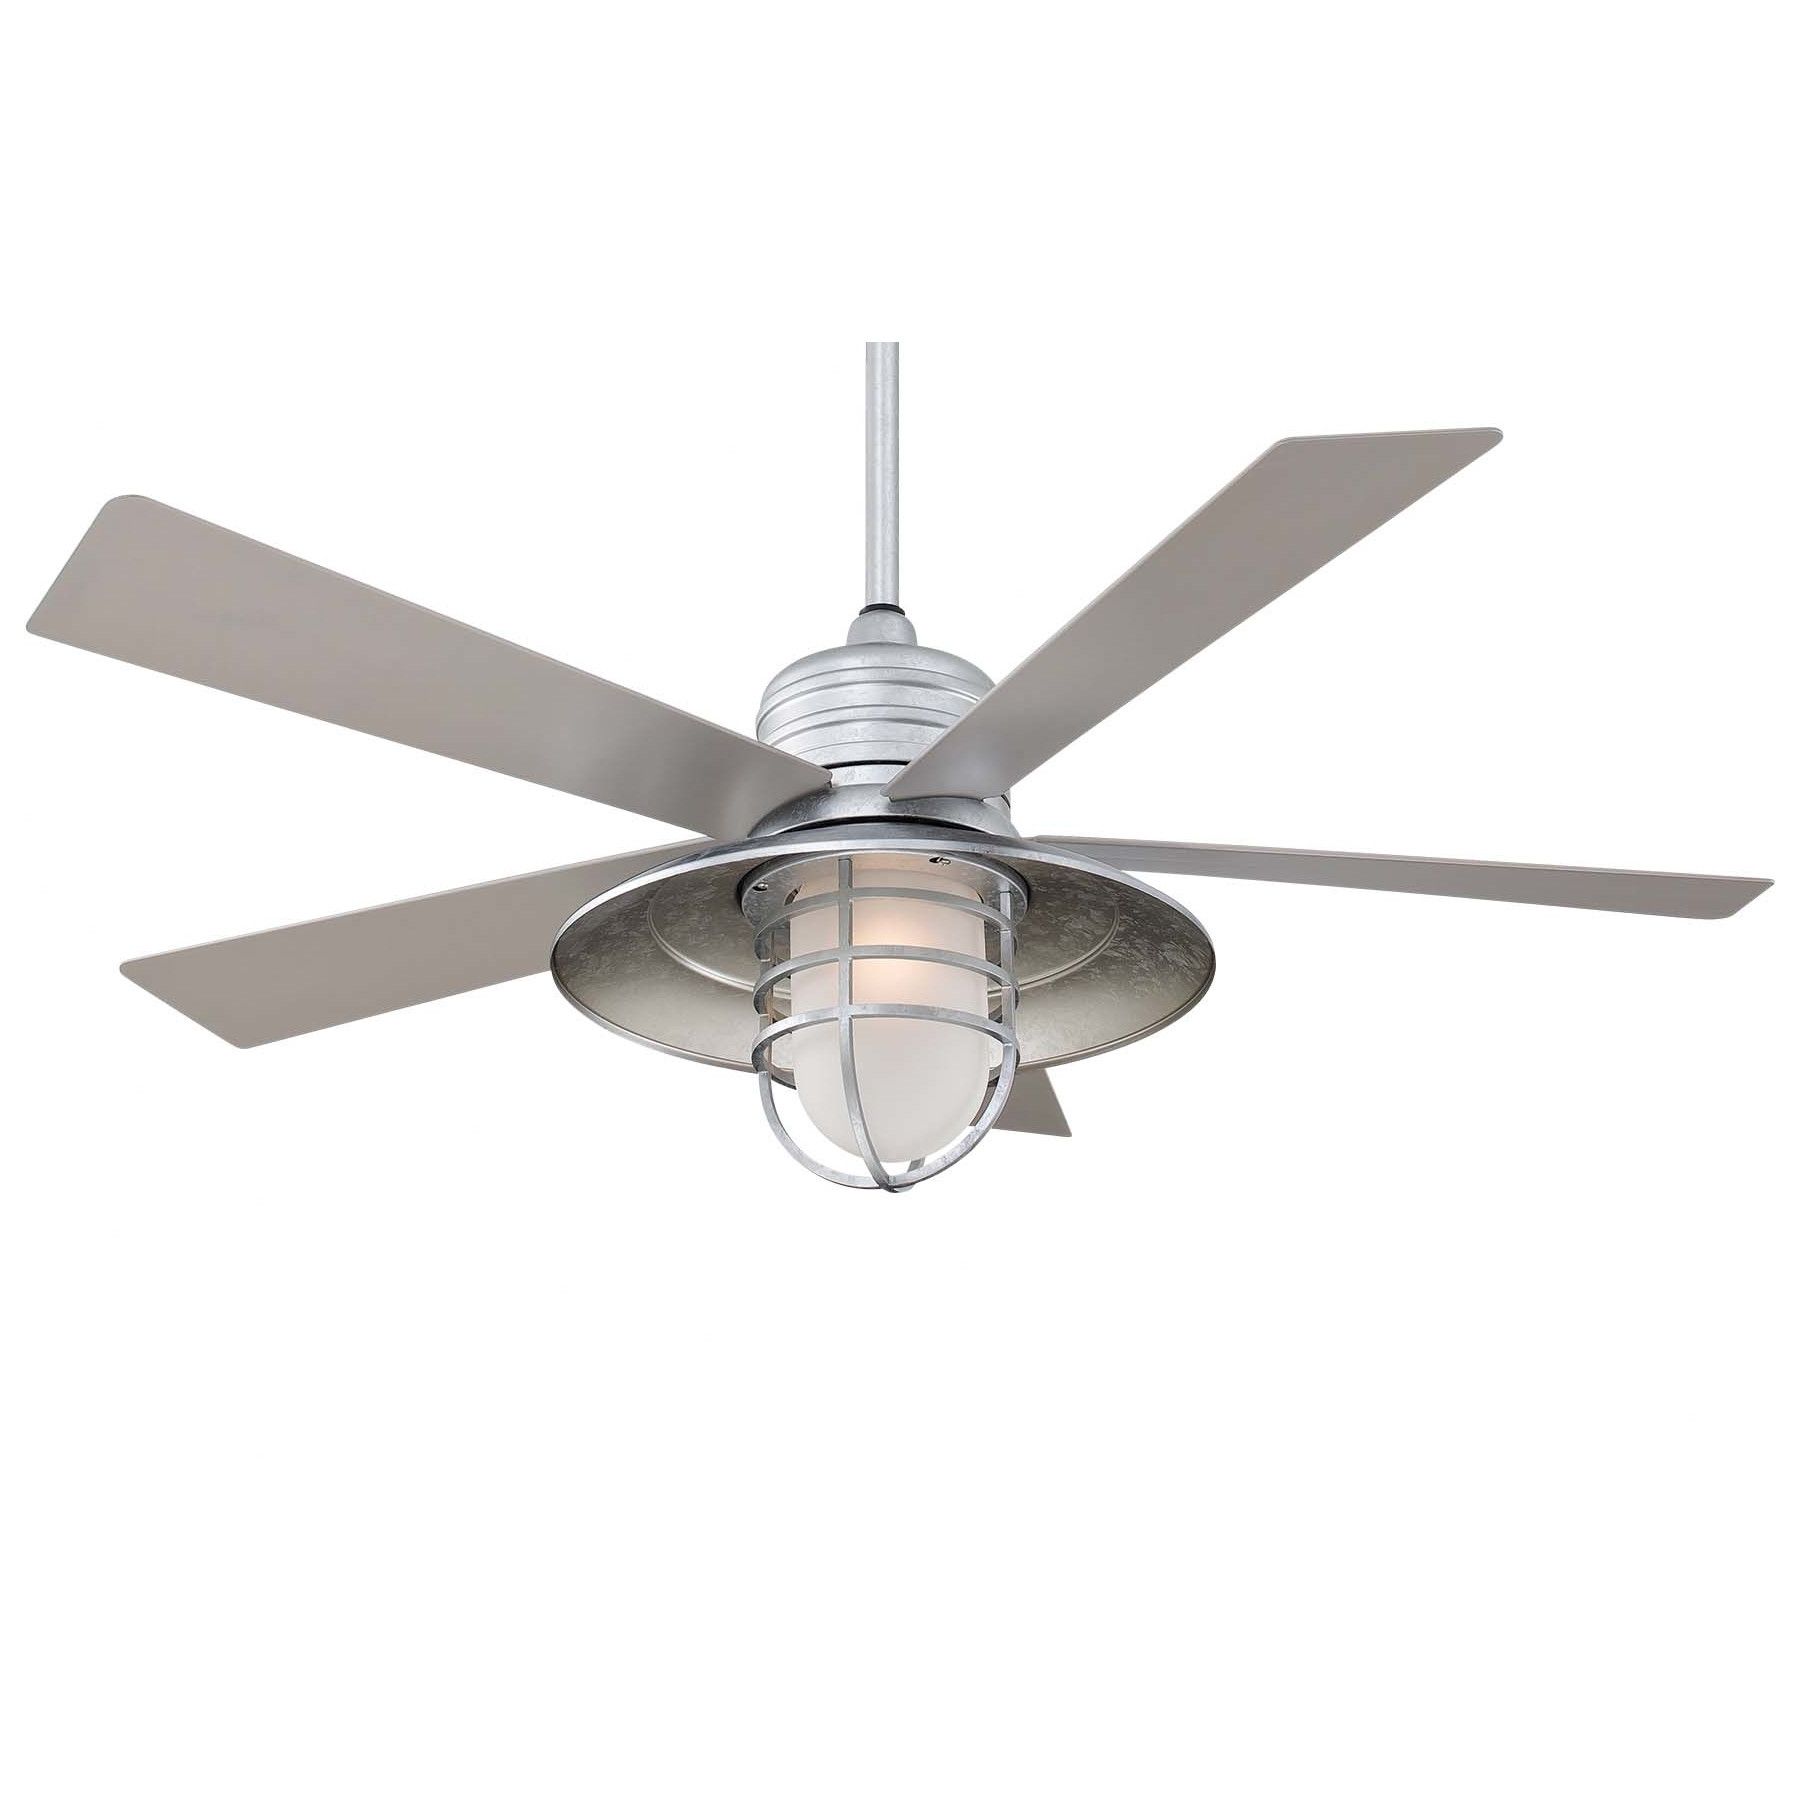 Wayfair Outdoor Ceiling Fans In Widely Used 42 Wayfair Ceiling Fans, Minka Aire 54quot; Rainman 5 Blade Indoor (View 1 of 20)